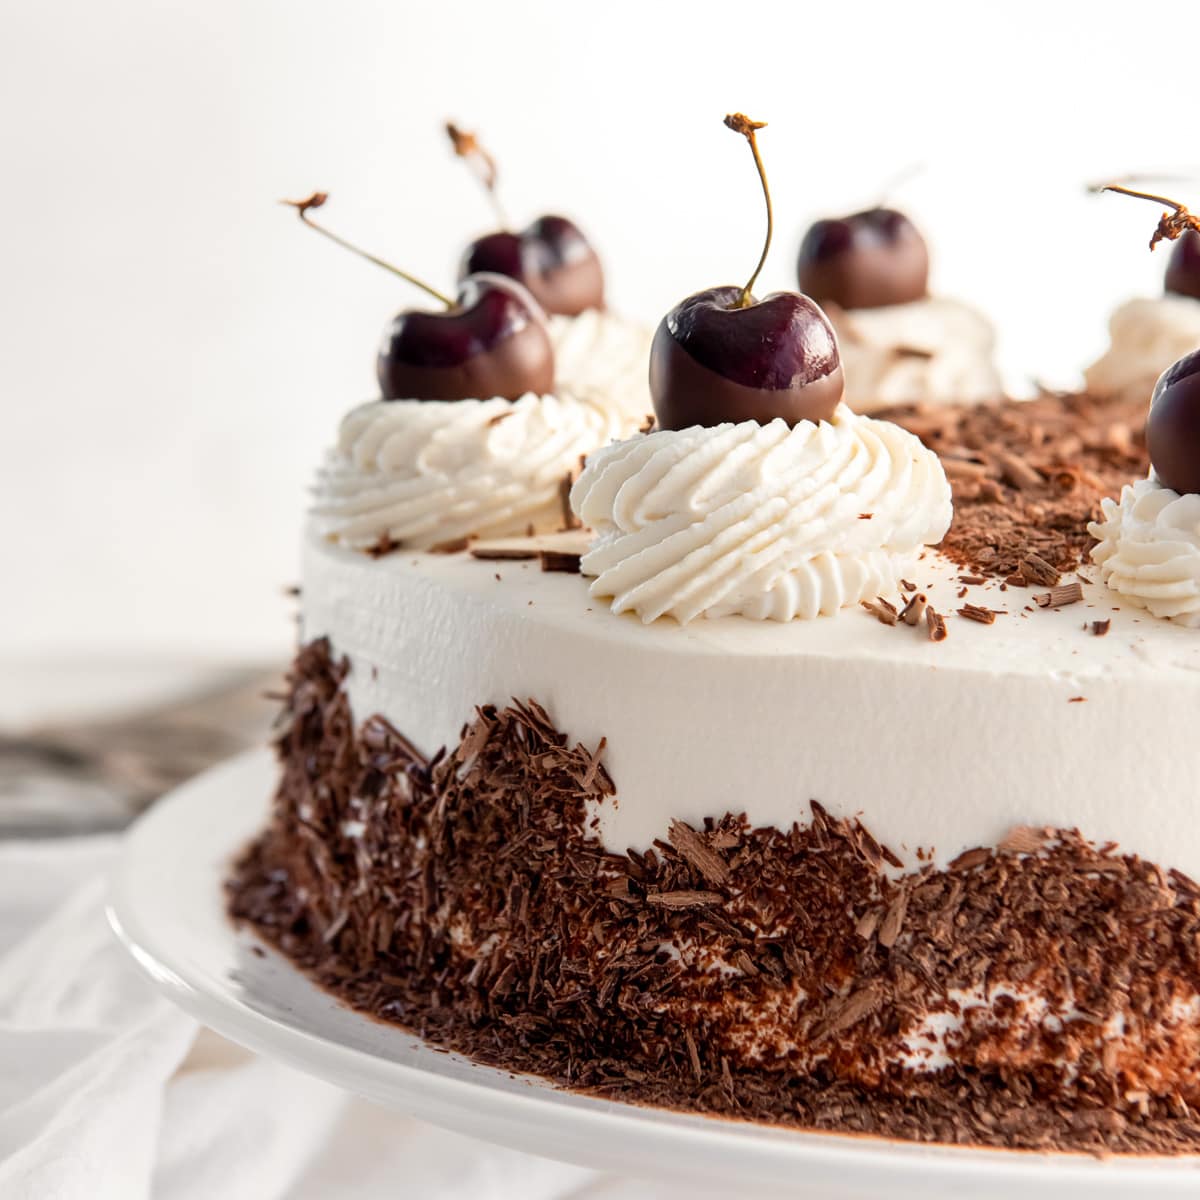 black forest cake with whipped cream frosting, chocolate shavings and dark cherries for garnish.